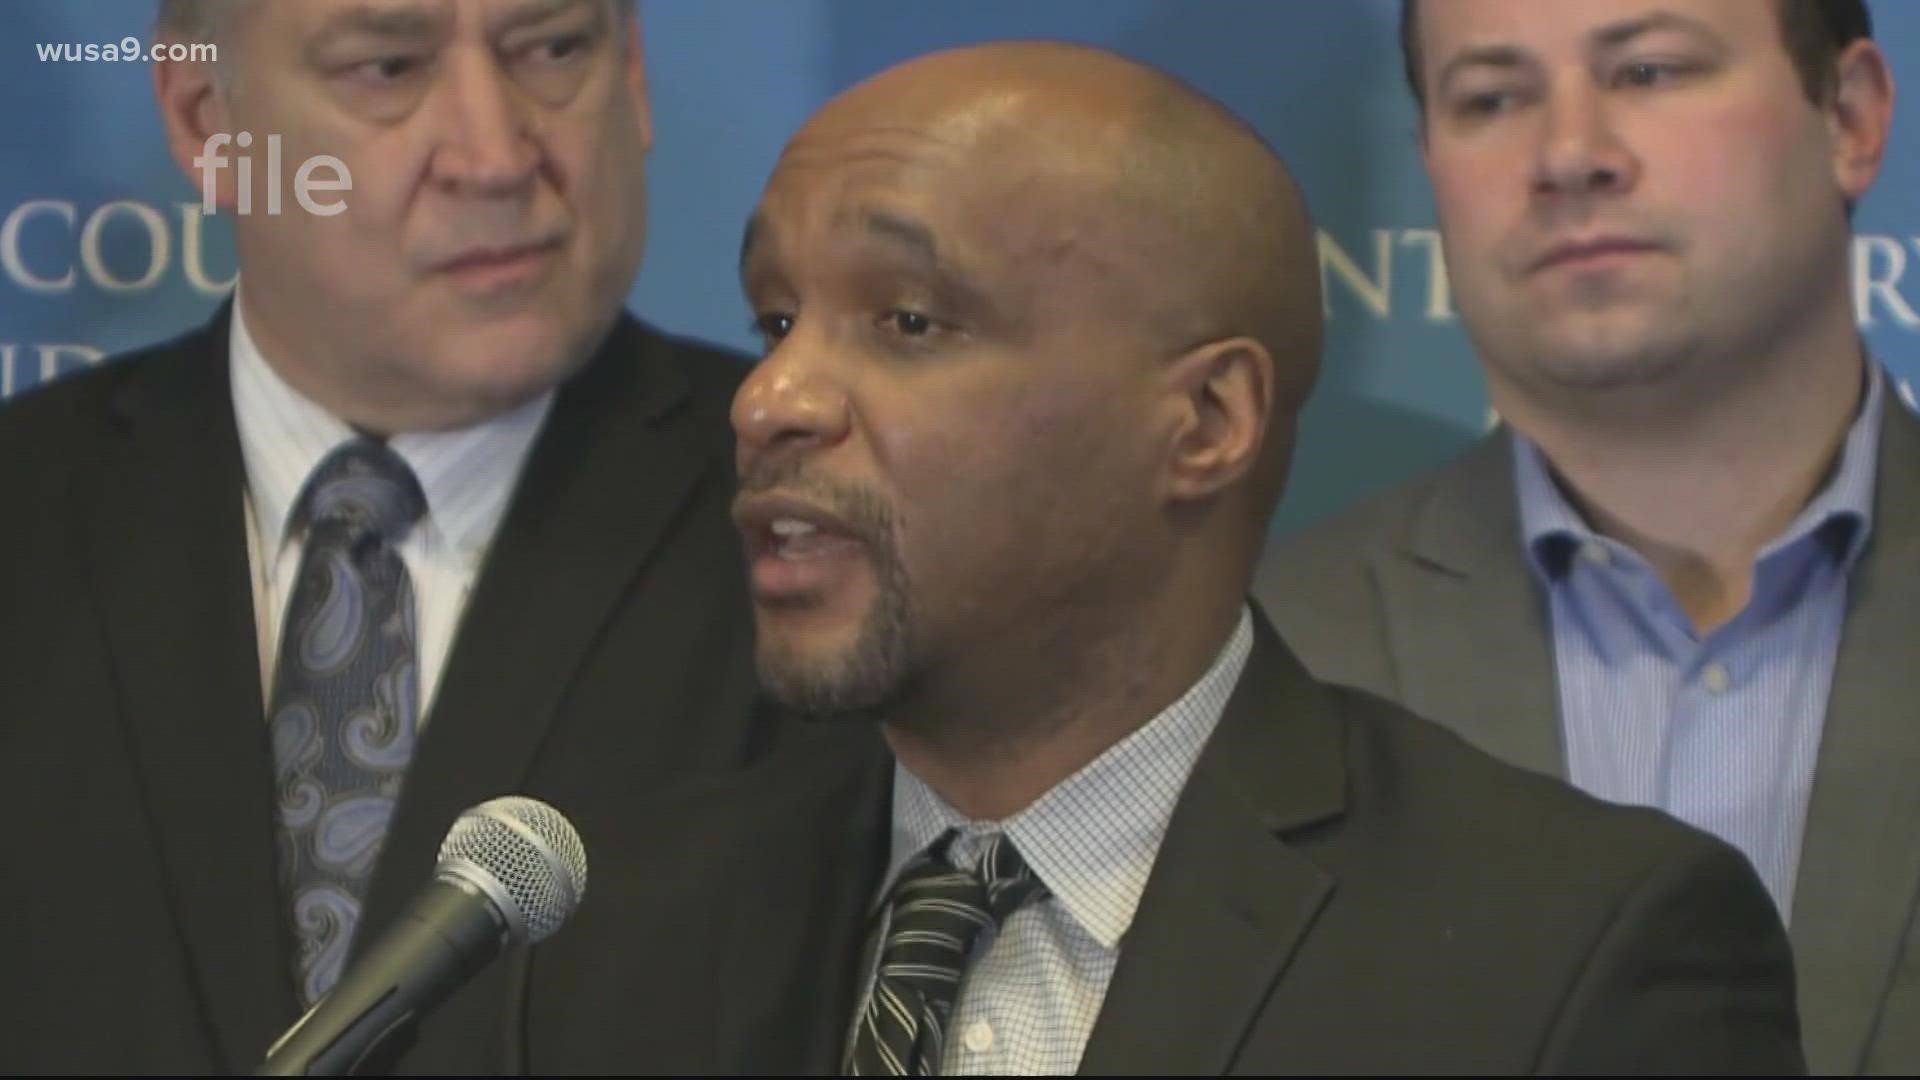 Dr. Travis Gayles announced his resignation, but not give a reason for stepping down